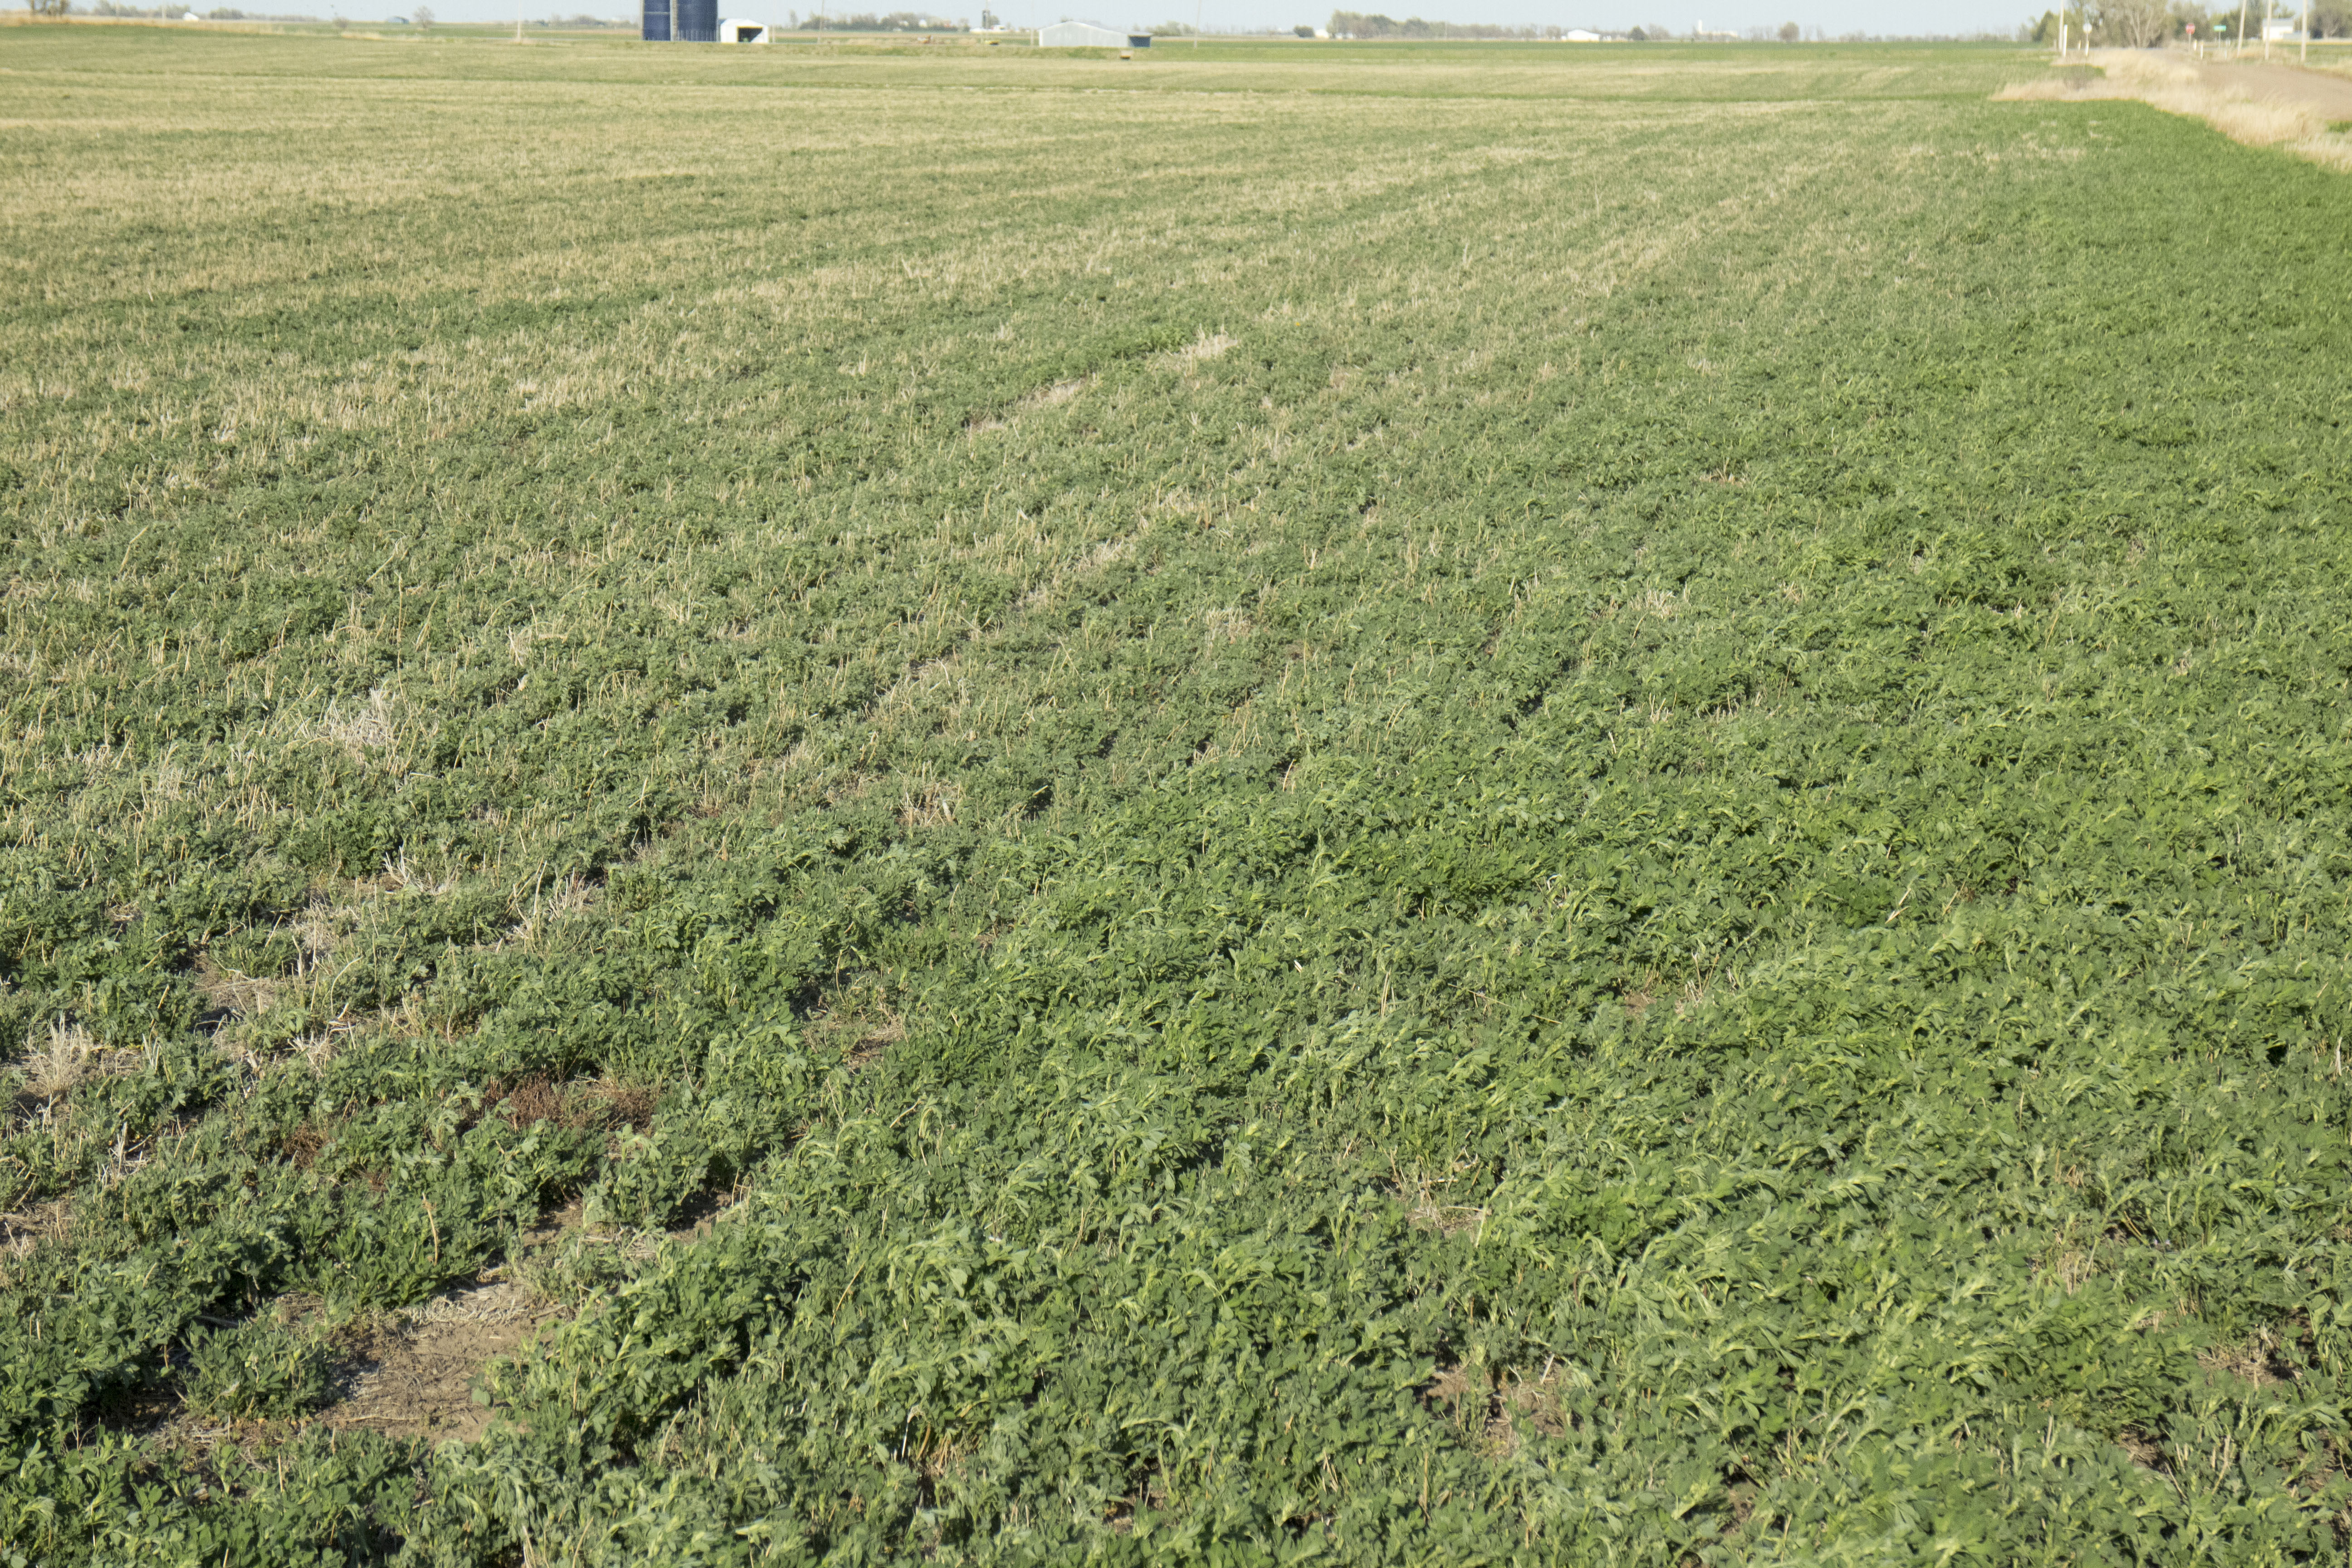 Blue Gold™ Solutions grew Alfalfa with an RFV of 227.2% and Crude Protein of 26.3% on the 5th cutting, reversed yellowing & Hollow Stem Syndrome, grew very thick hay over 2’ tall, and produced 5+ tons per acre on a newly established dryland field in a drought!